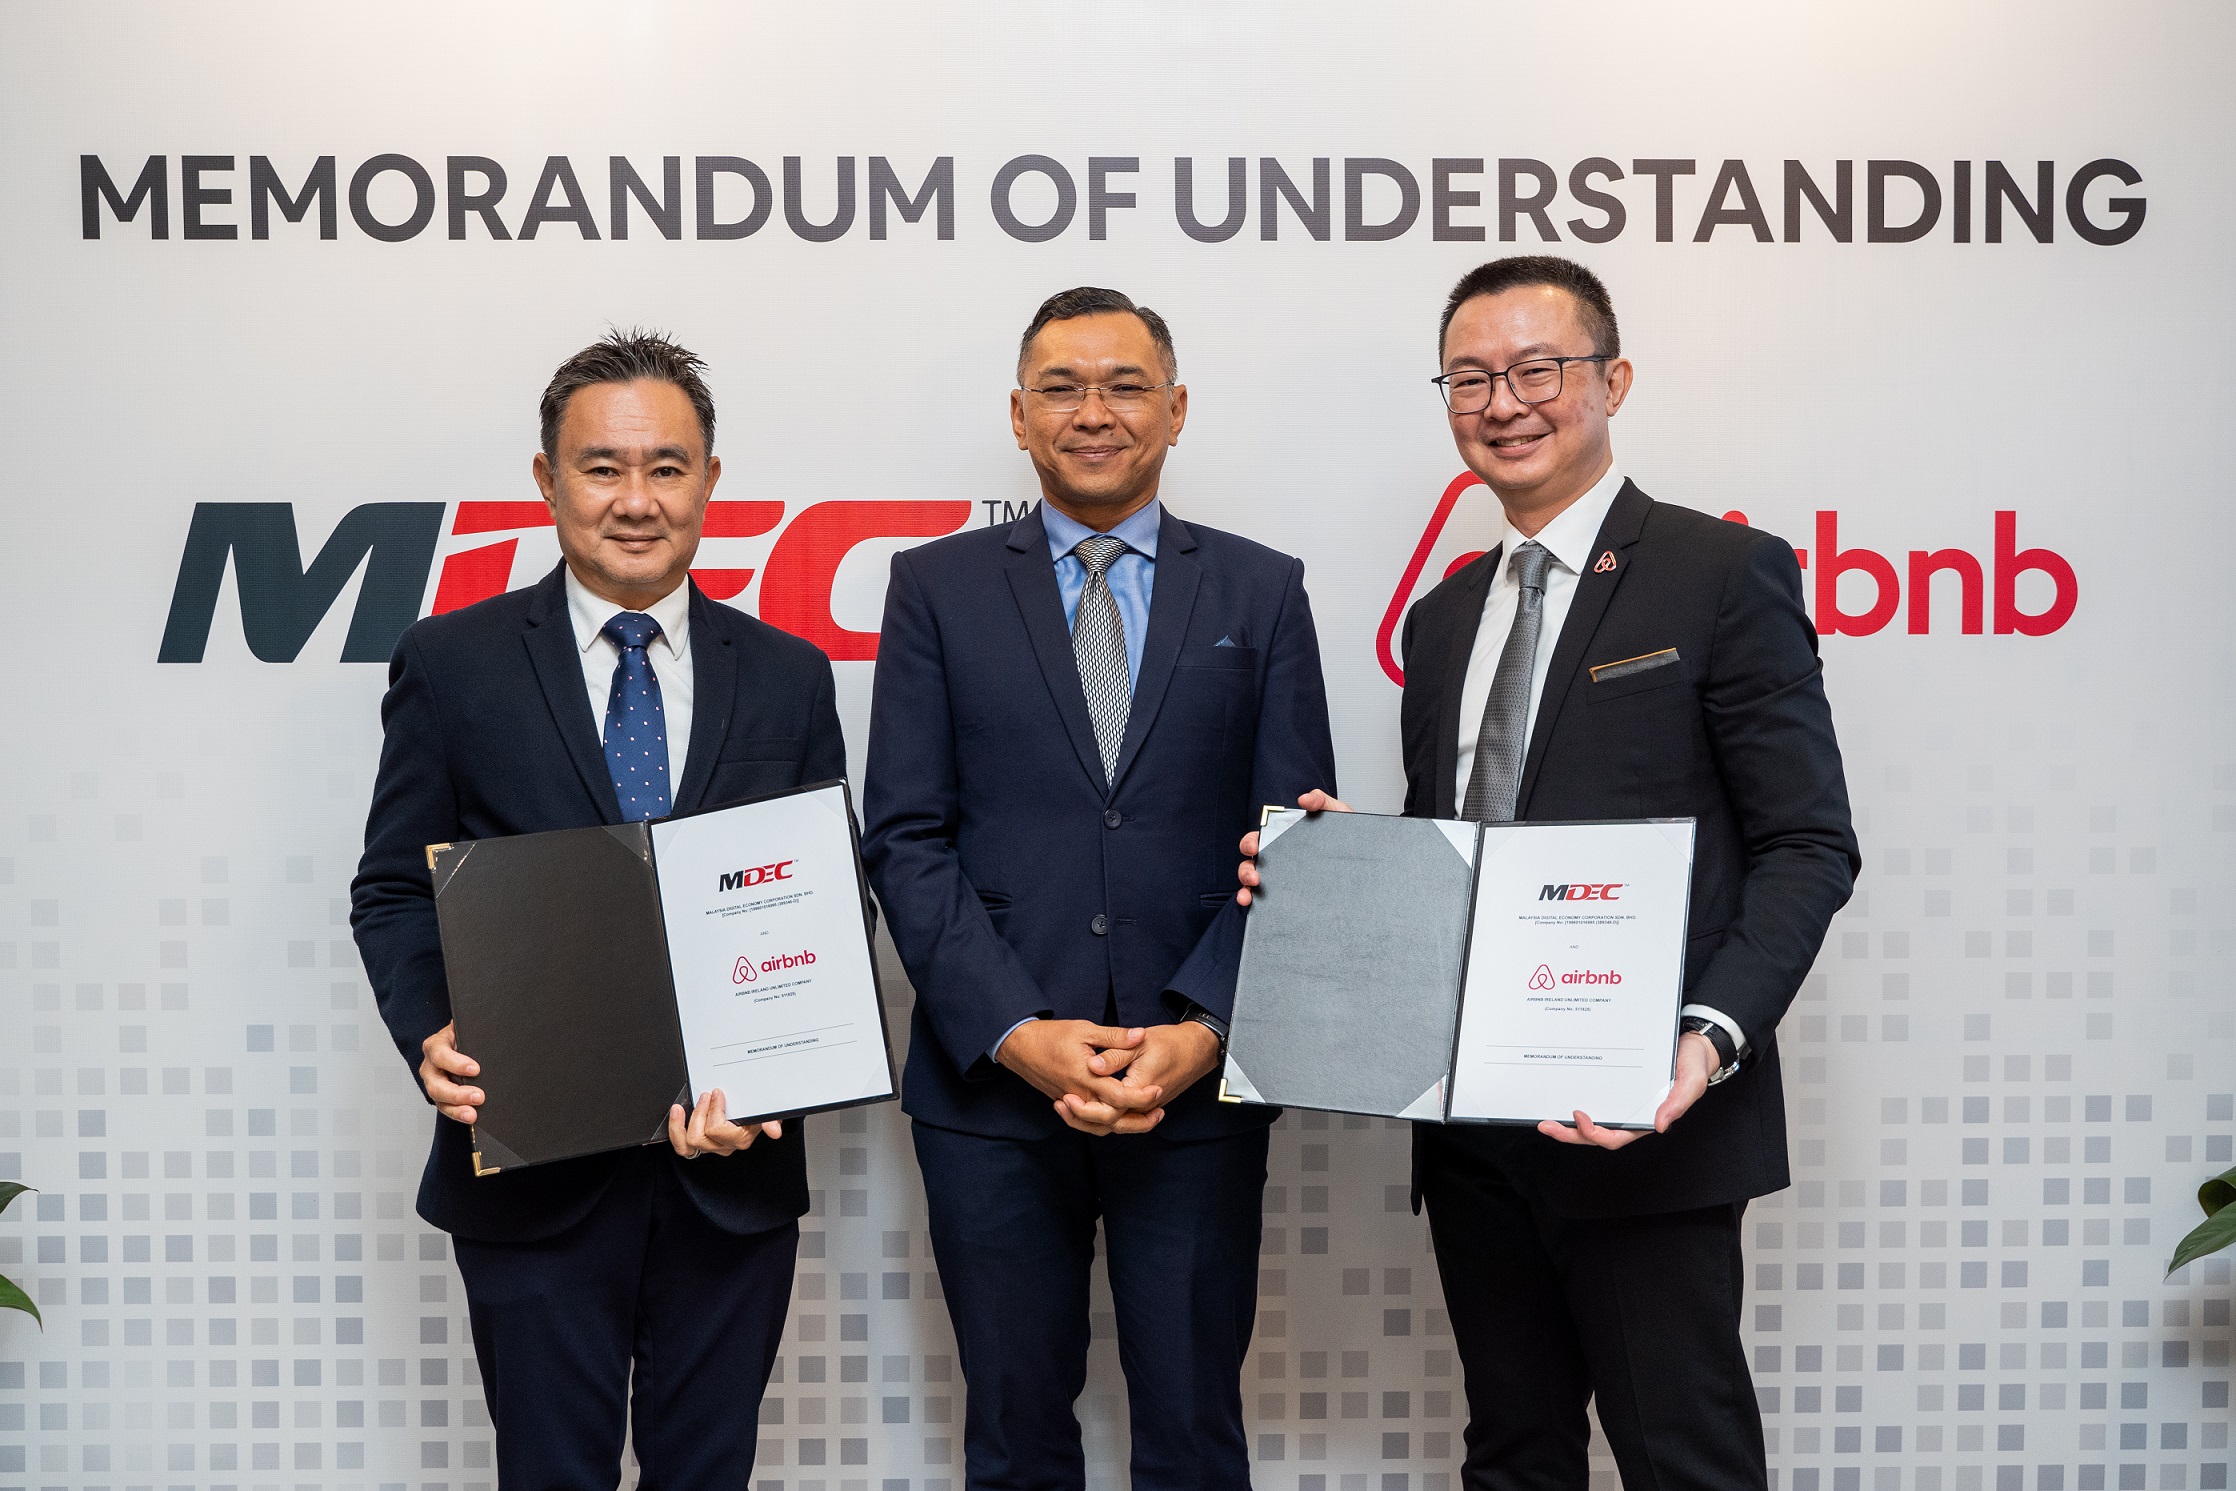 (From Left): Steven Liew, Airbnb’s director of Public Policy for Asia Pacific; Mahadhir Aziz, CEO of MDEC; Fadzli Abdul Wahit, senior vice president of the Digital Industry Development Division at MDEC. 